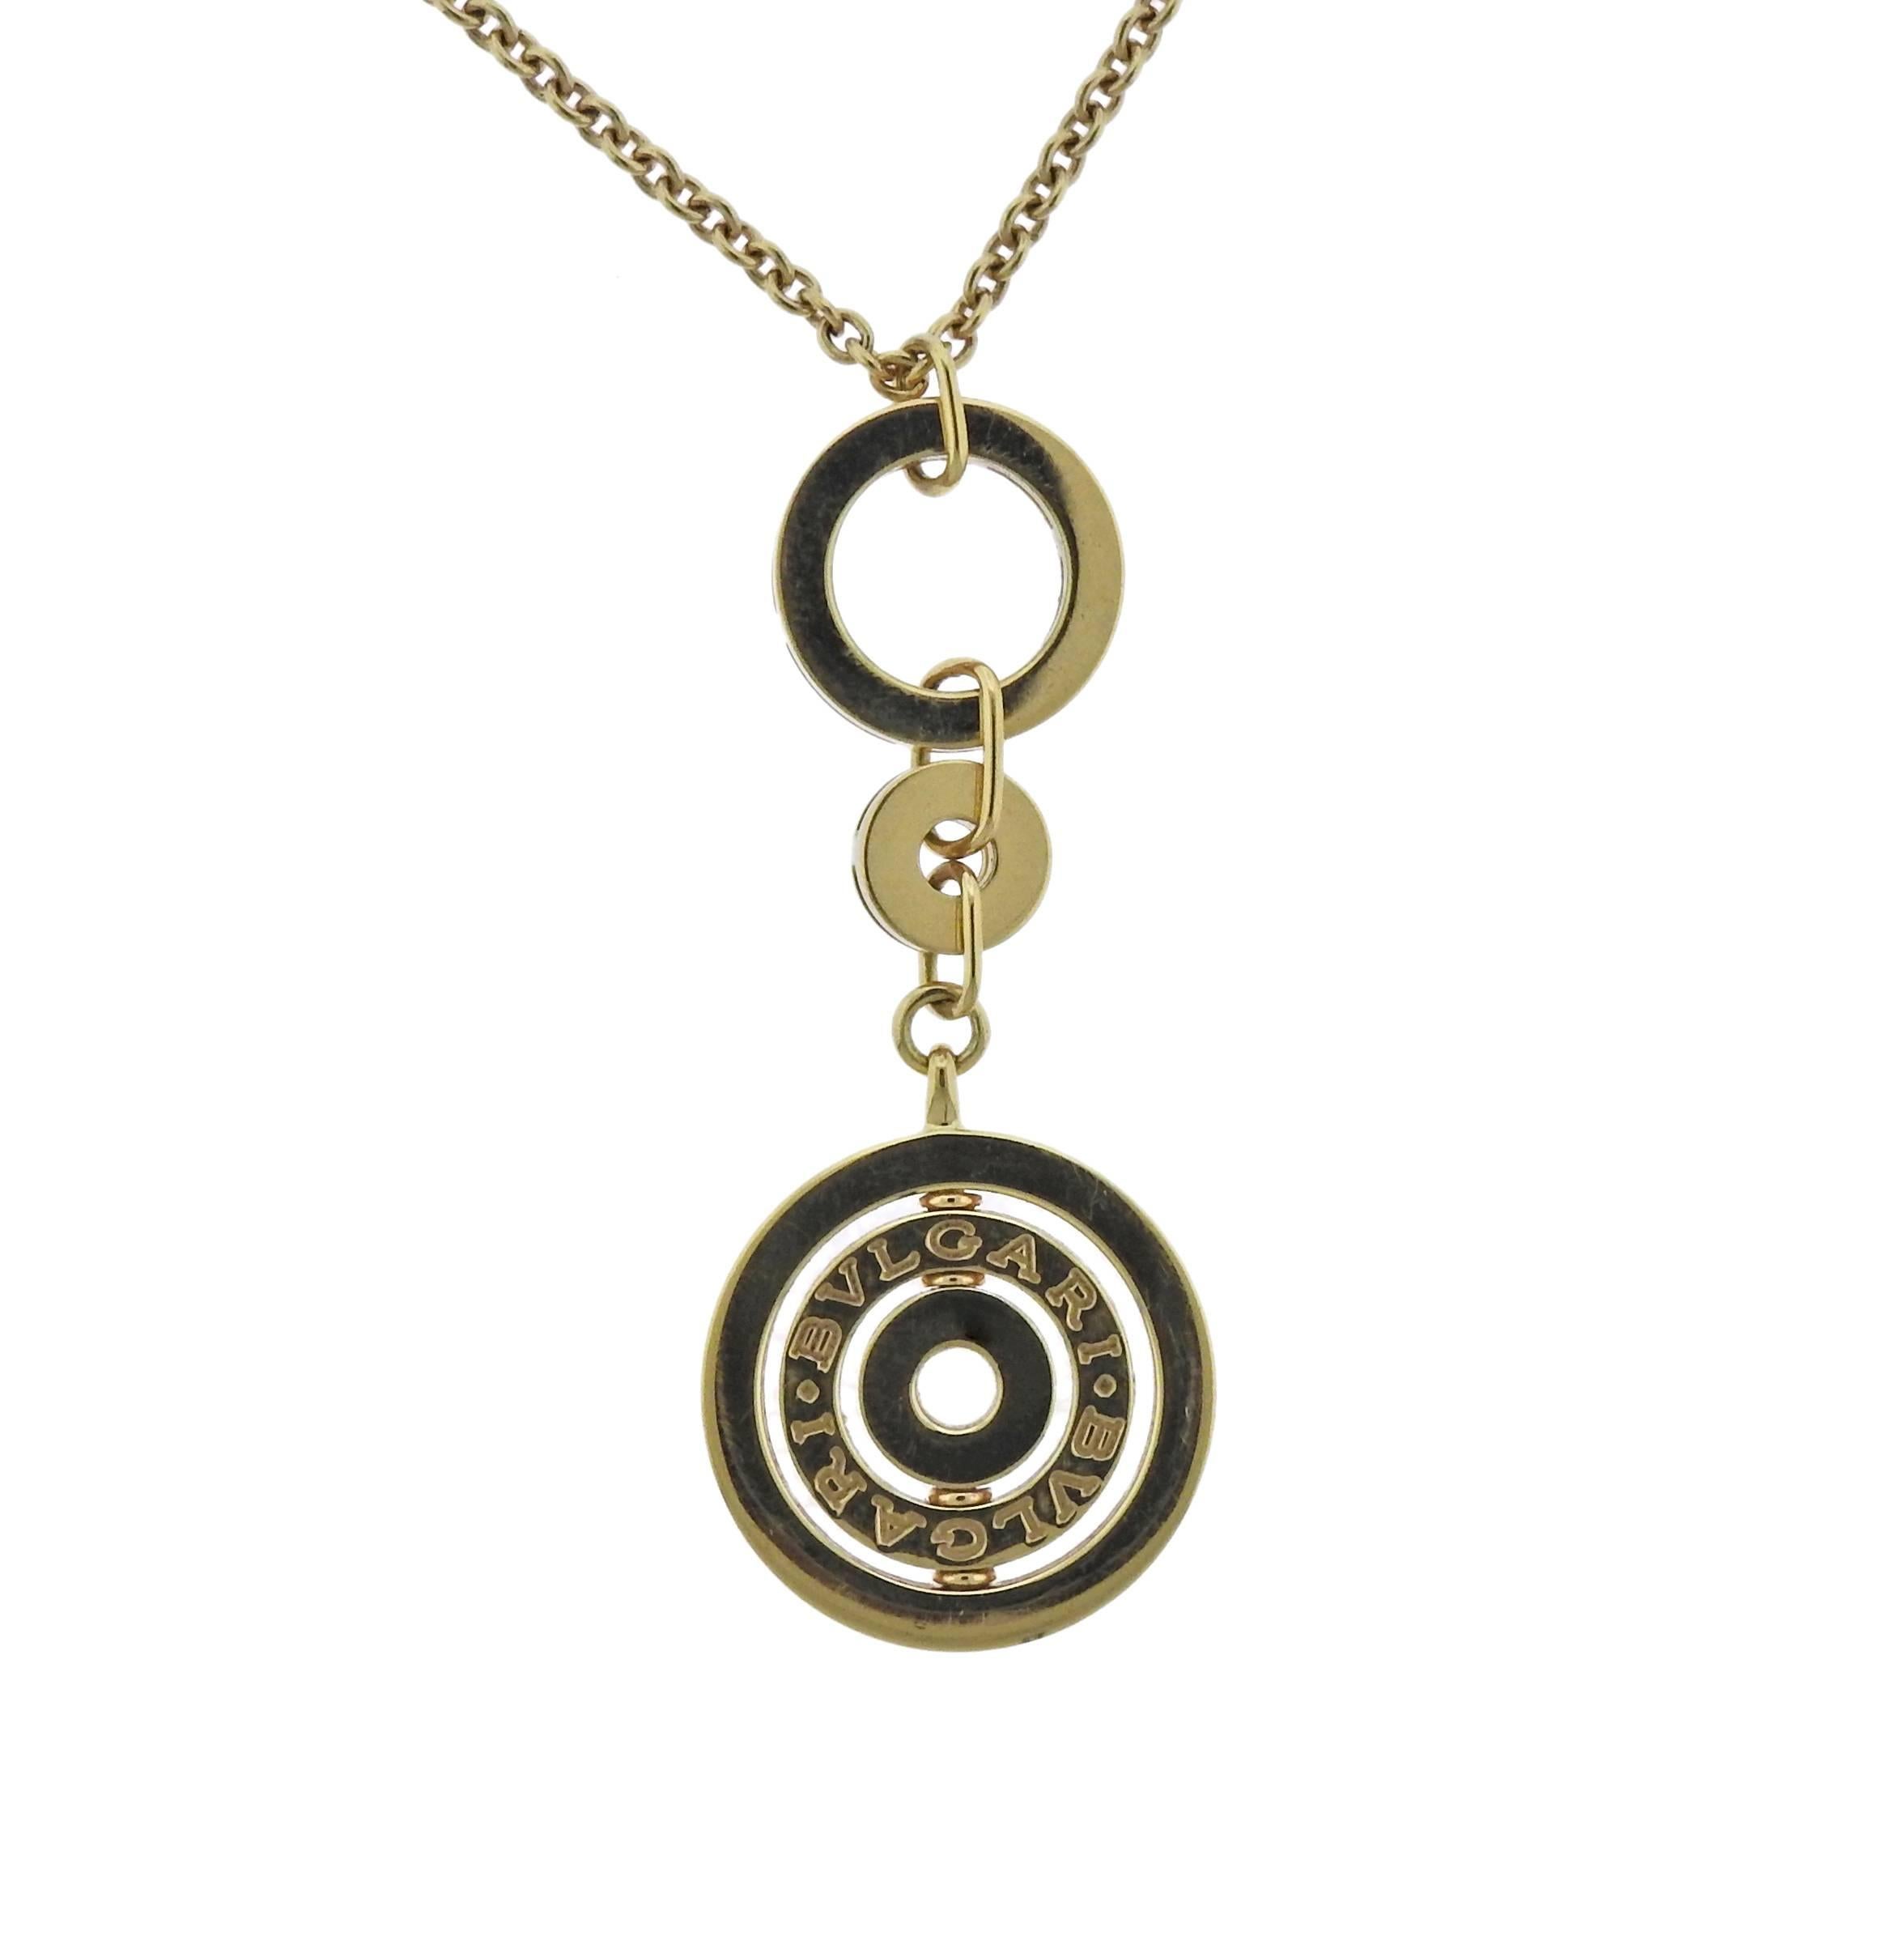 18k yellow gold pendant necklace, crafted by Bulgari for Astrale collection. Necklace is 18.5